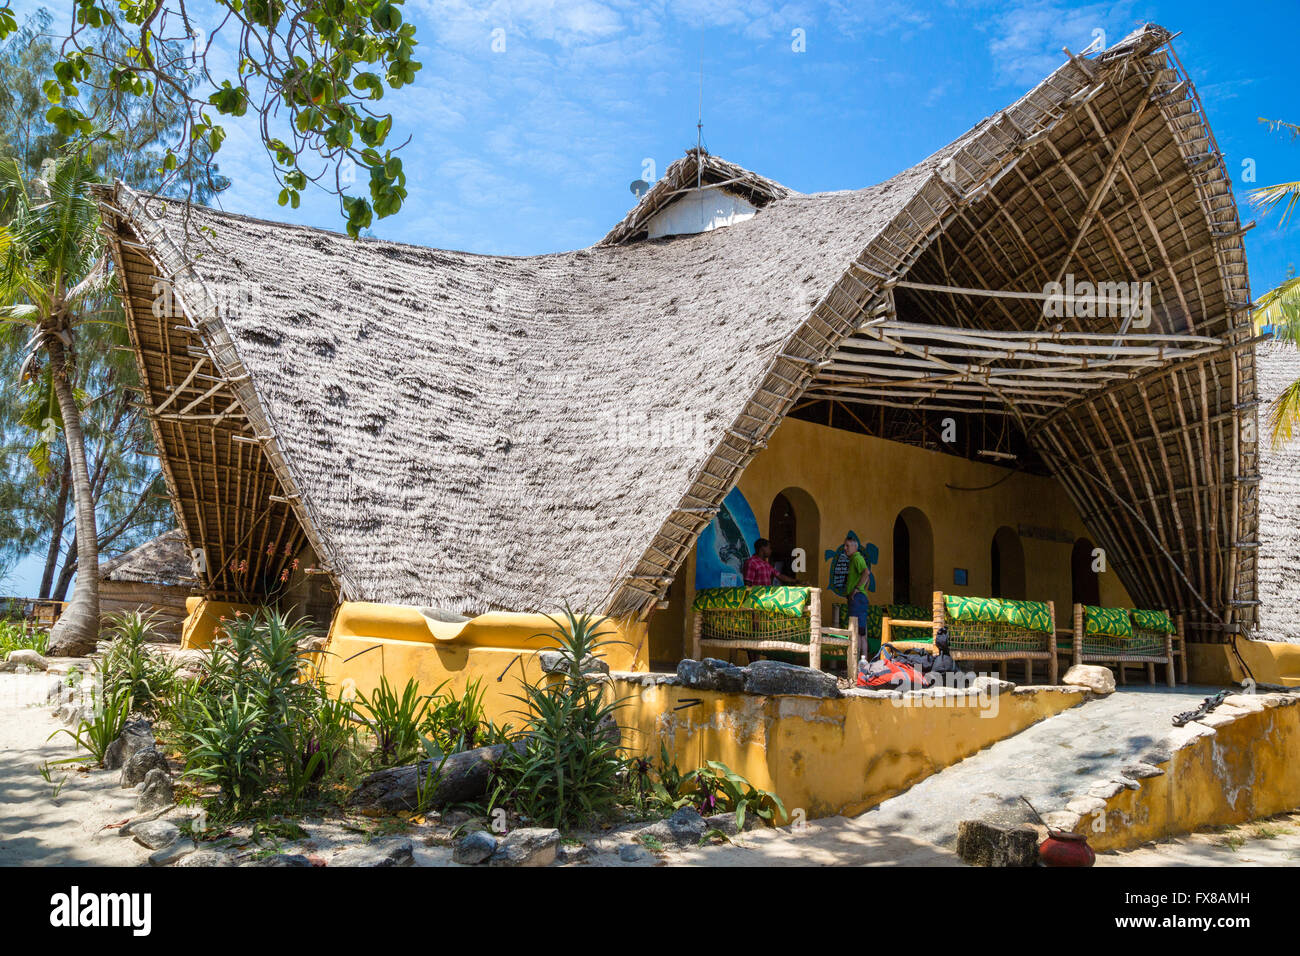 Palm thatched roof of the big open visitor centre on Chumbe Island off the coast of Zanzibar East Africa Stock Photo